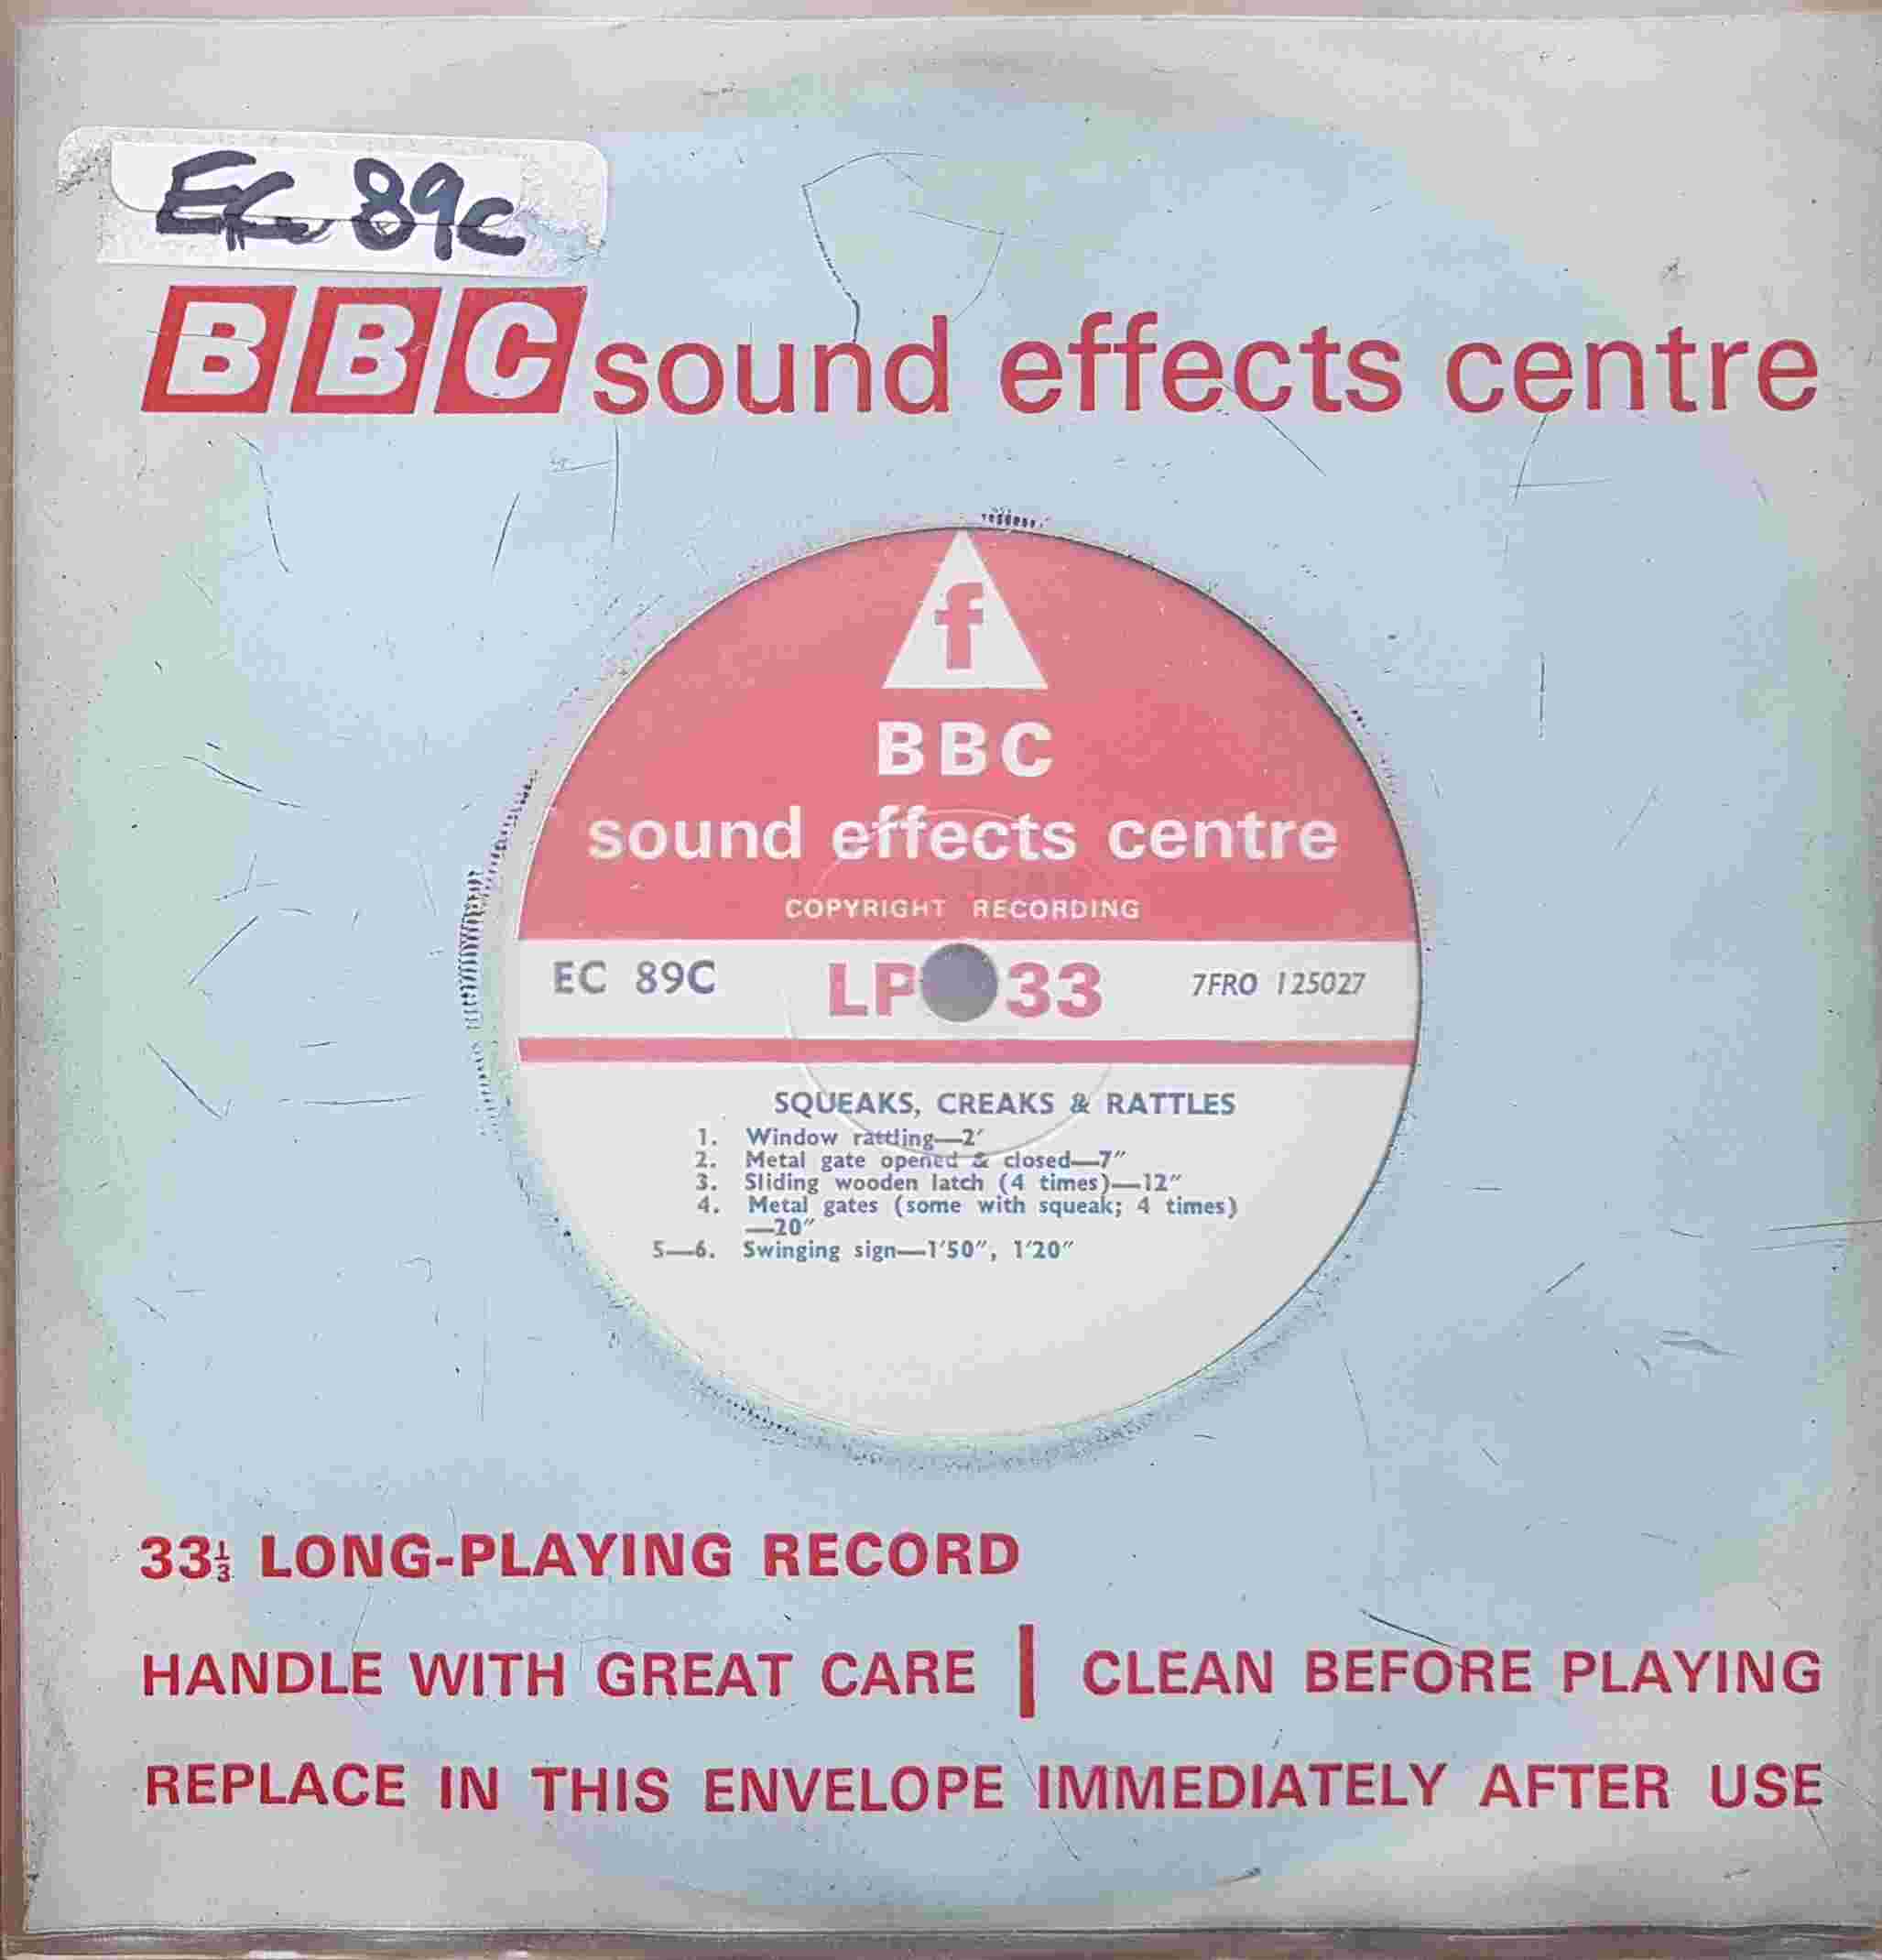 Picture of EC 89C Squeaks, creaks & rattles by artist Not registered from the BBC records and Tapes library